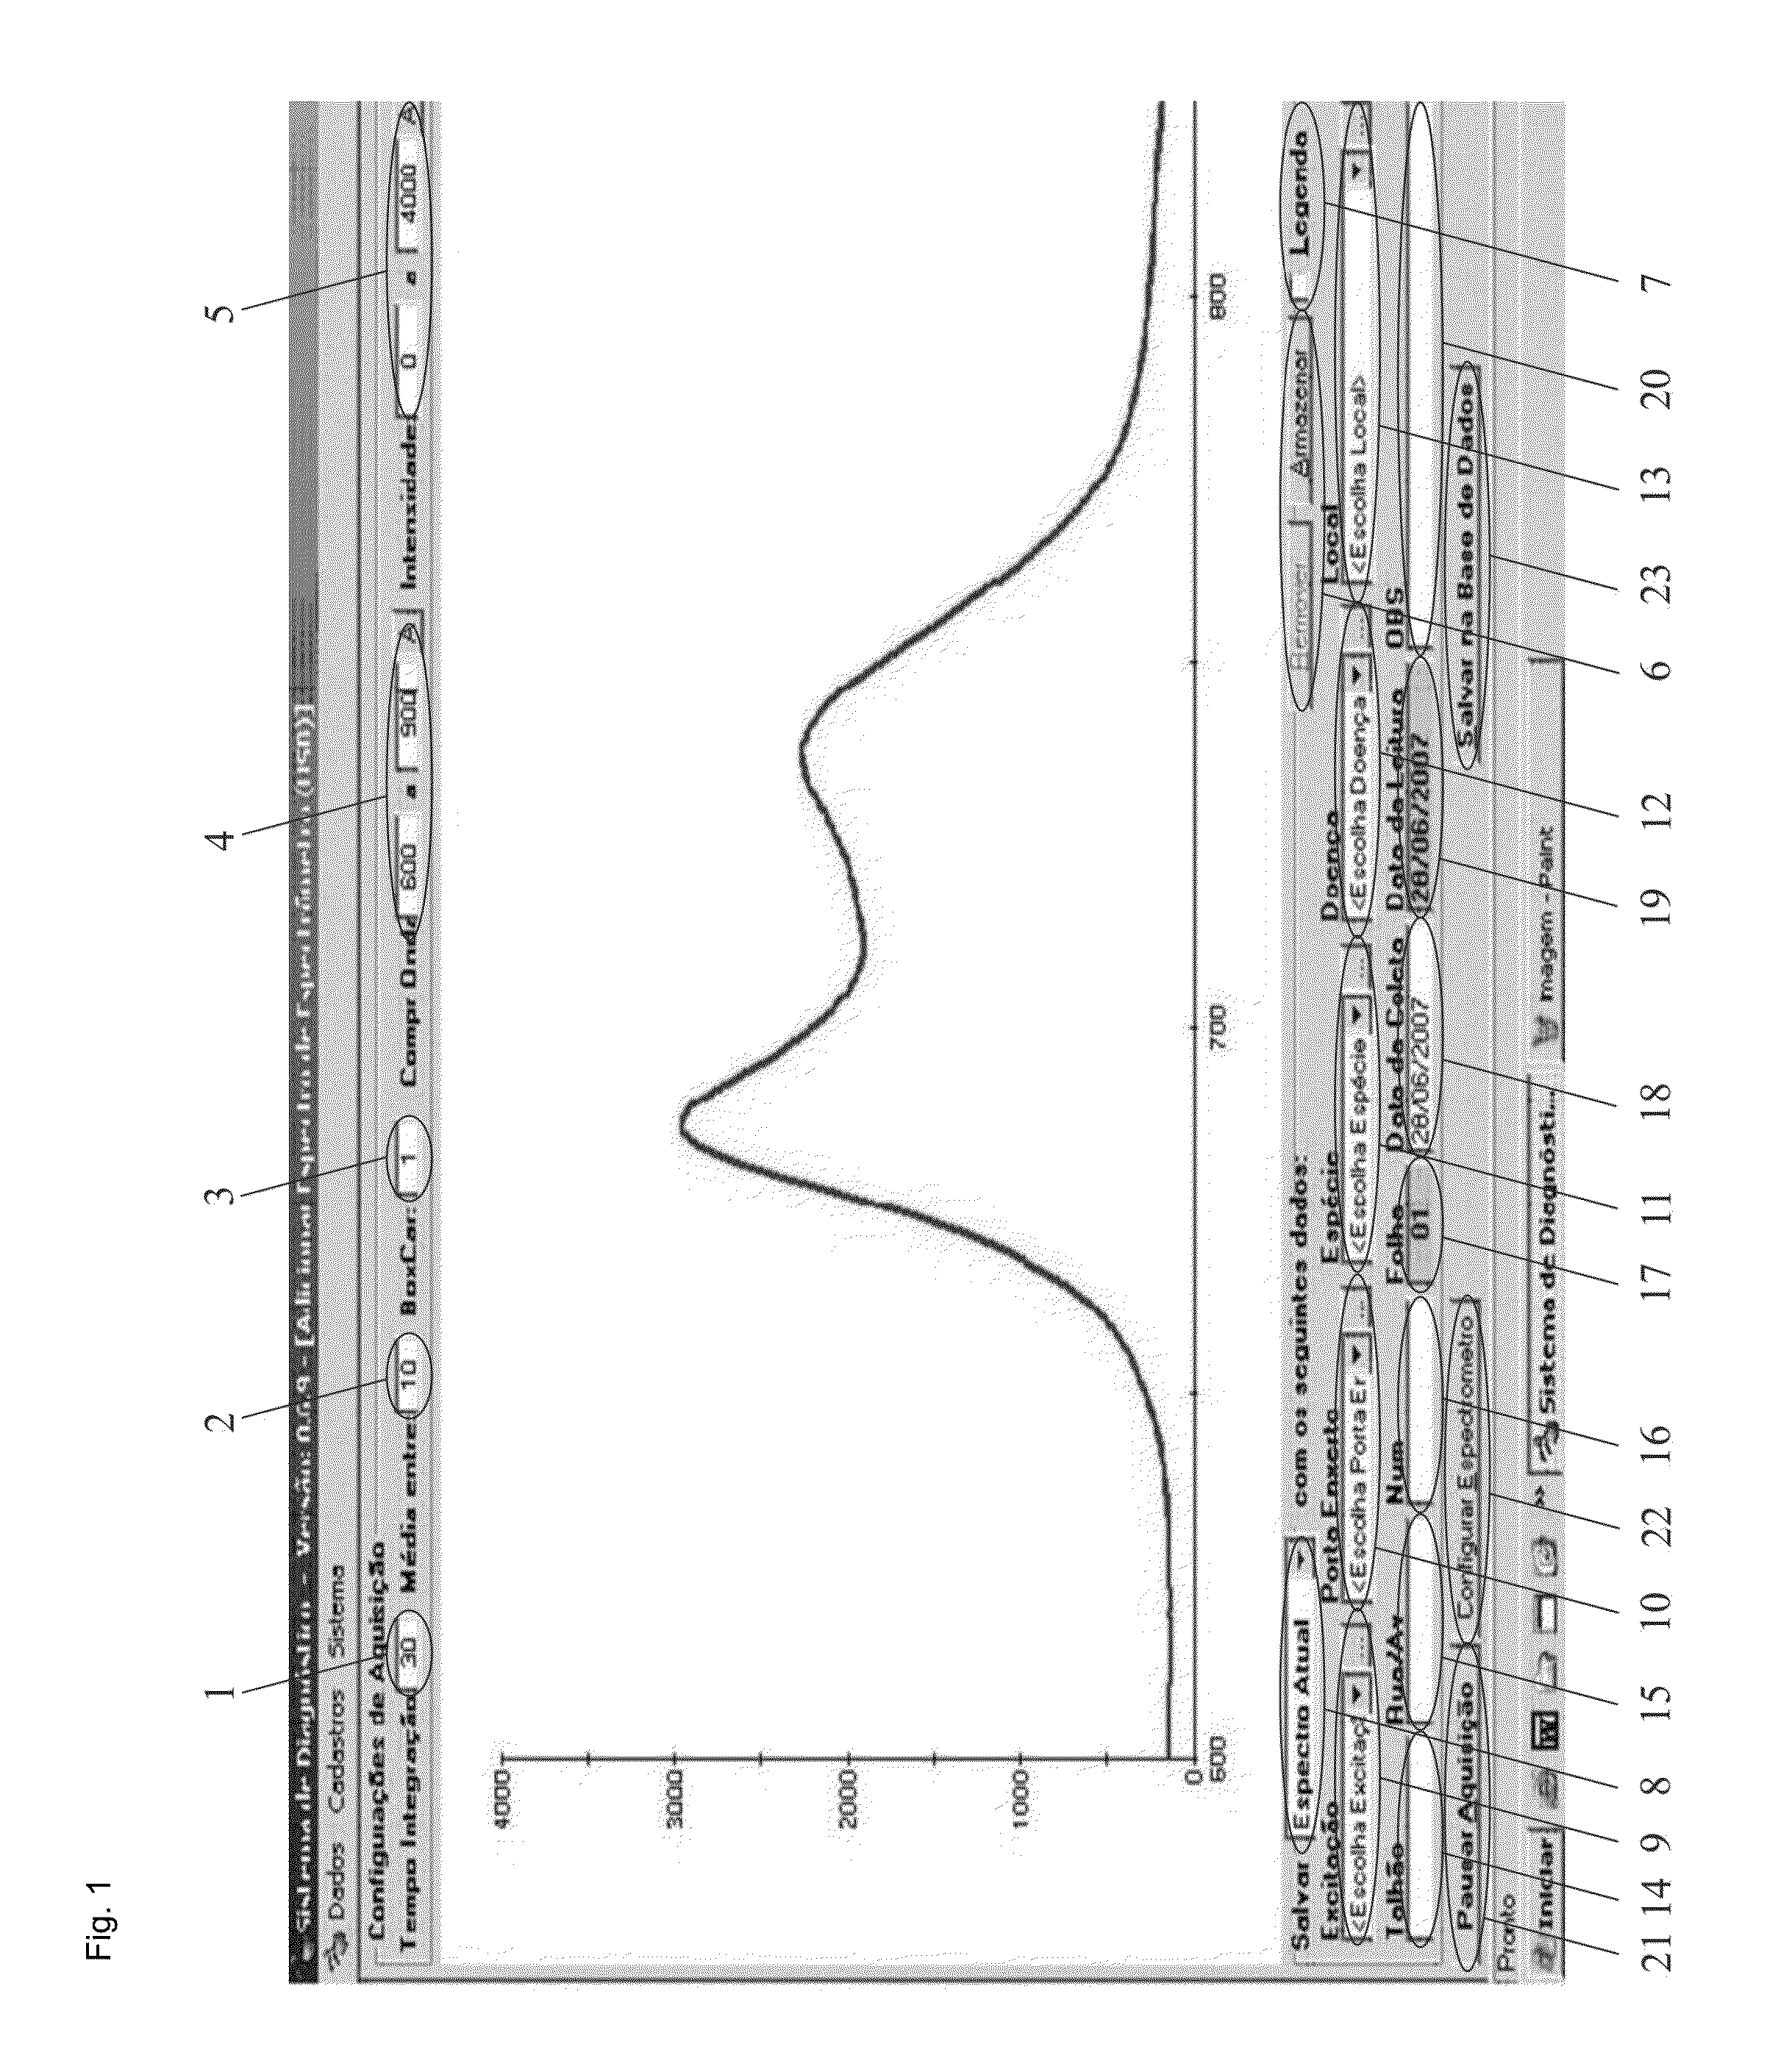 Method, apparatus and system for diagnosis of stress and disease in higher plants